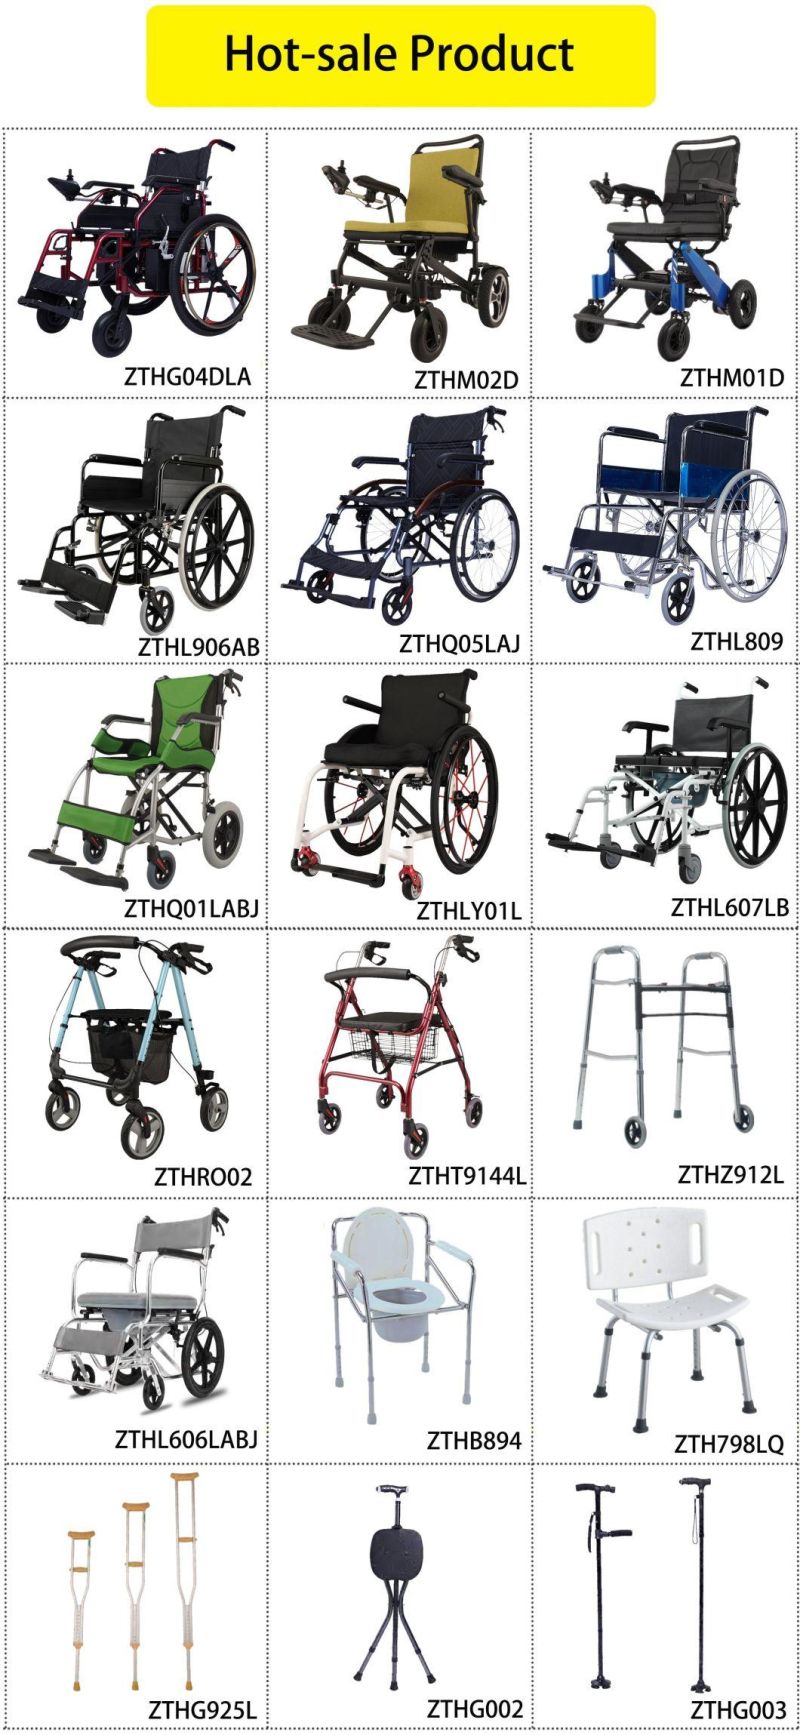 Antiskid Lightweight Adjustable Height Shower Safety Bath Chair Steel Home Toilet Care Nursing Products for Elderly People and Pregnant Woman Seat